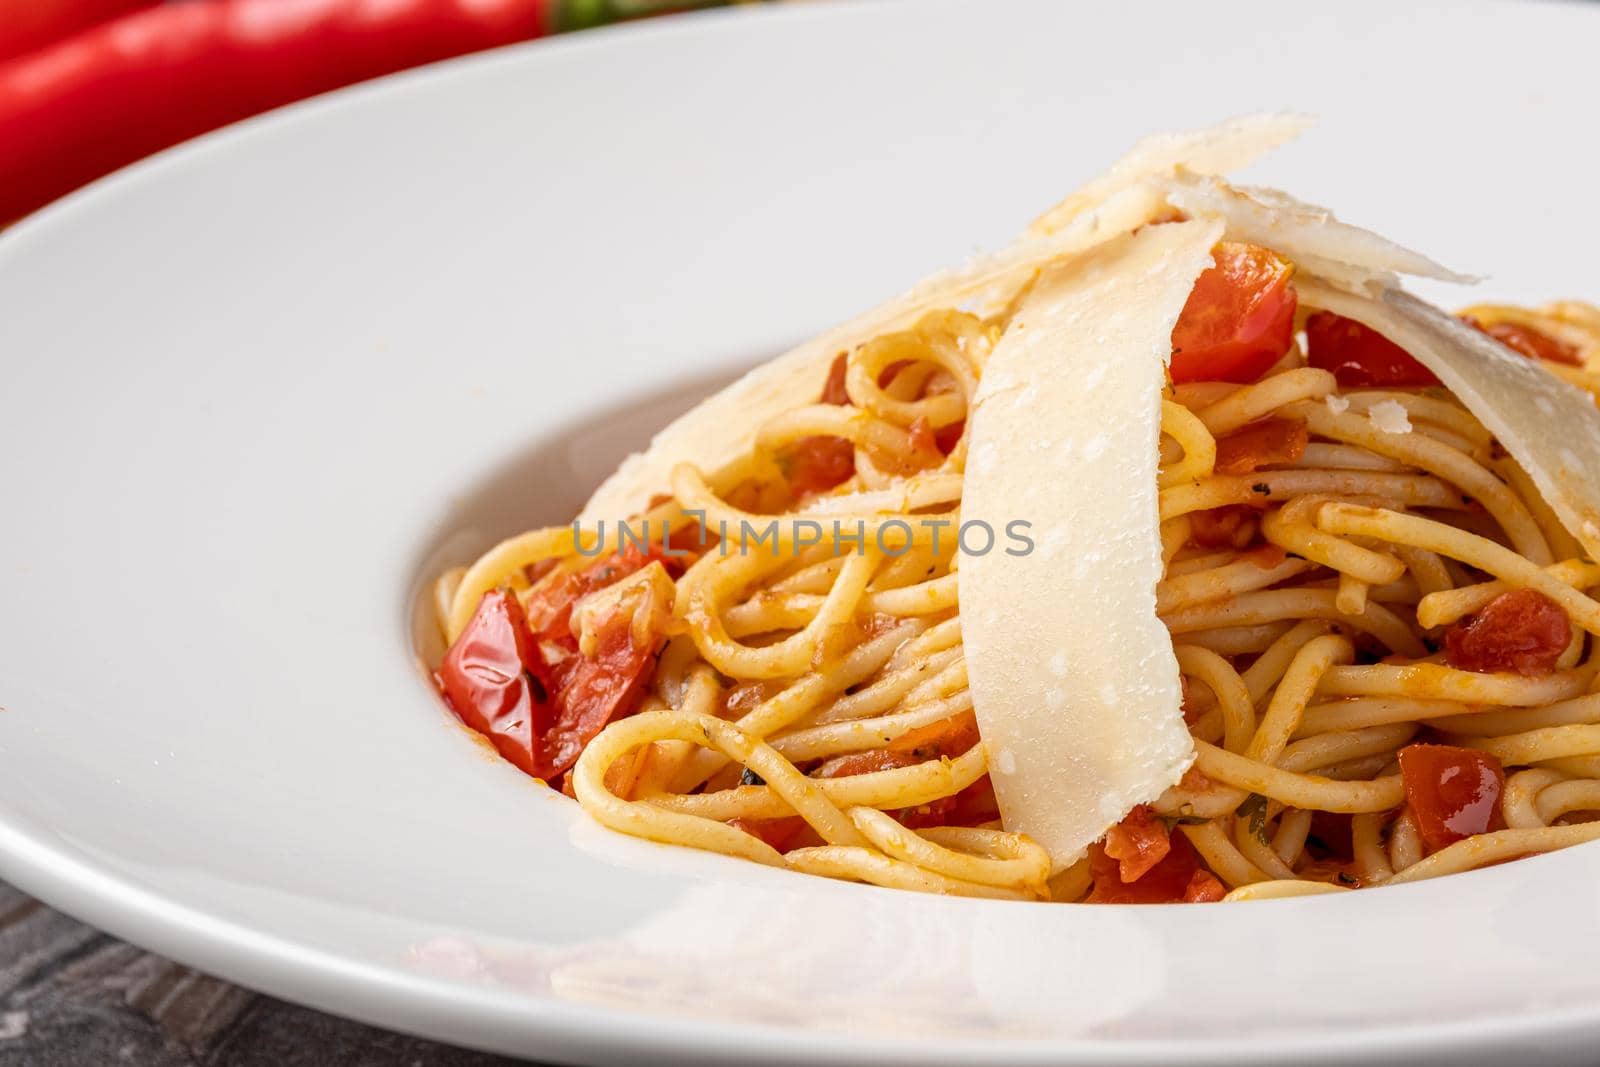 spaghetti with parmesan by Sonat